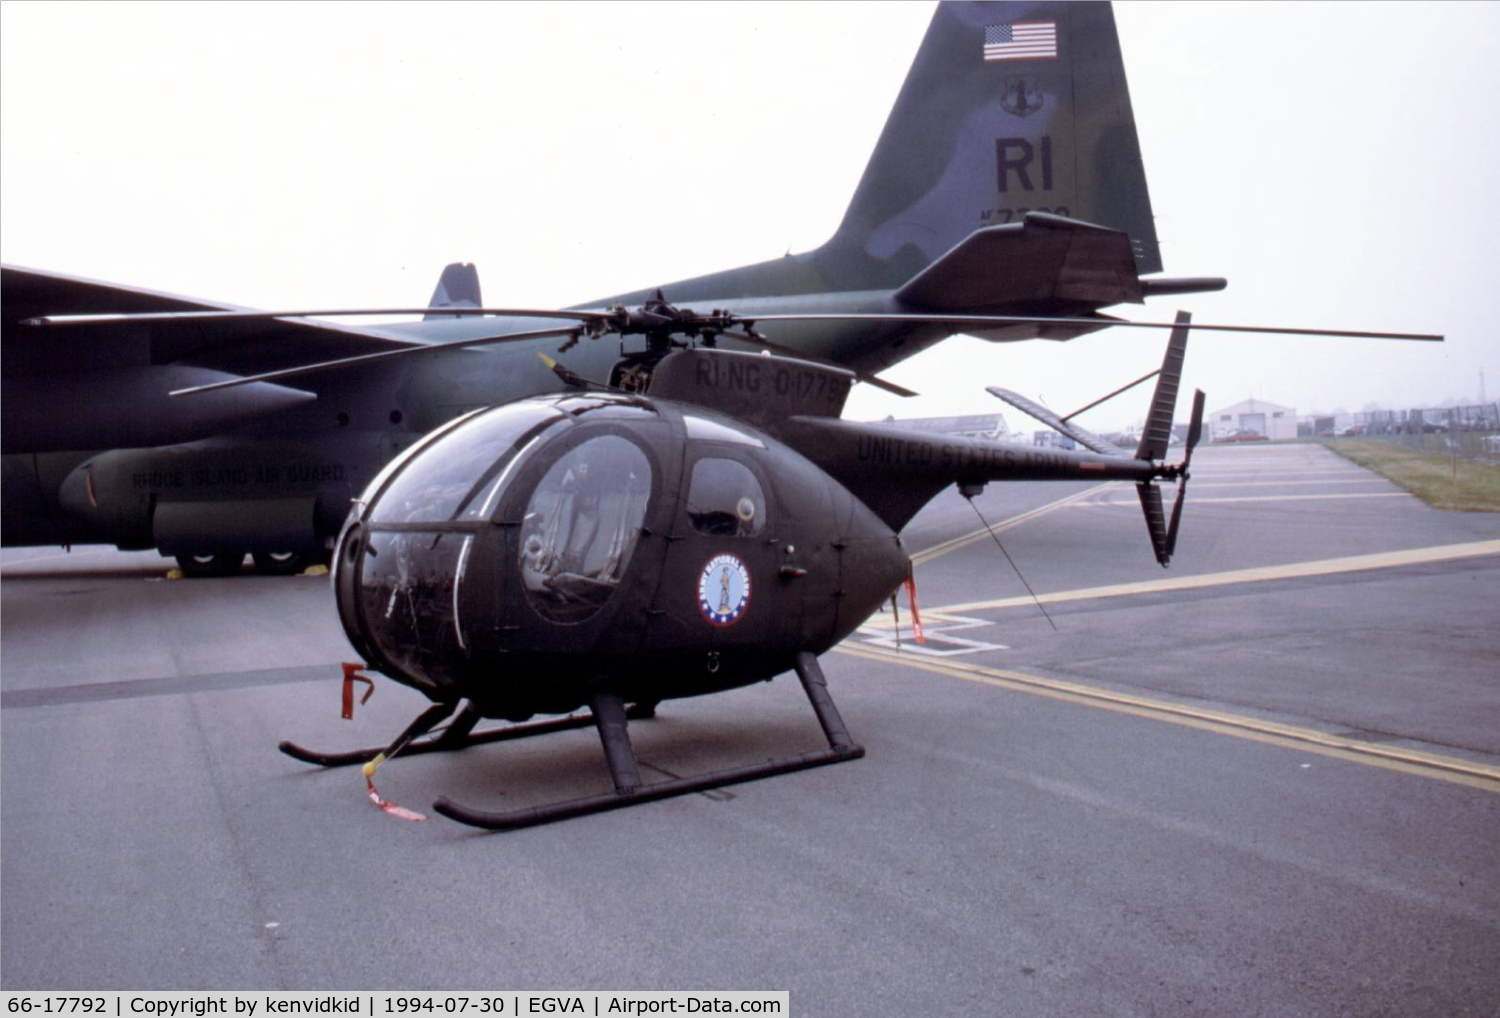 66-17792, 1966 Hughes OH-6A Cayuse C/N 0343, US ANG on static display, hitched a ride in the Rhode Island C-130.